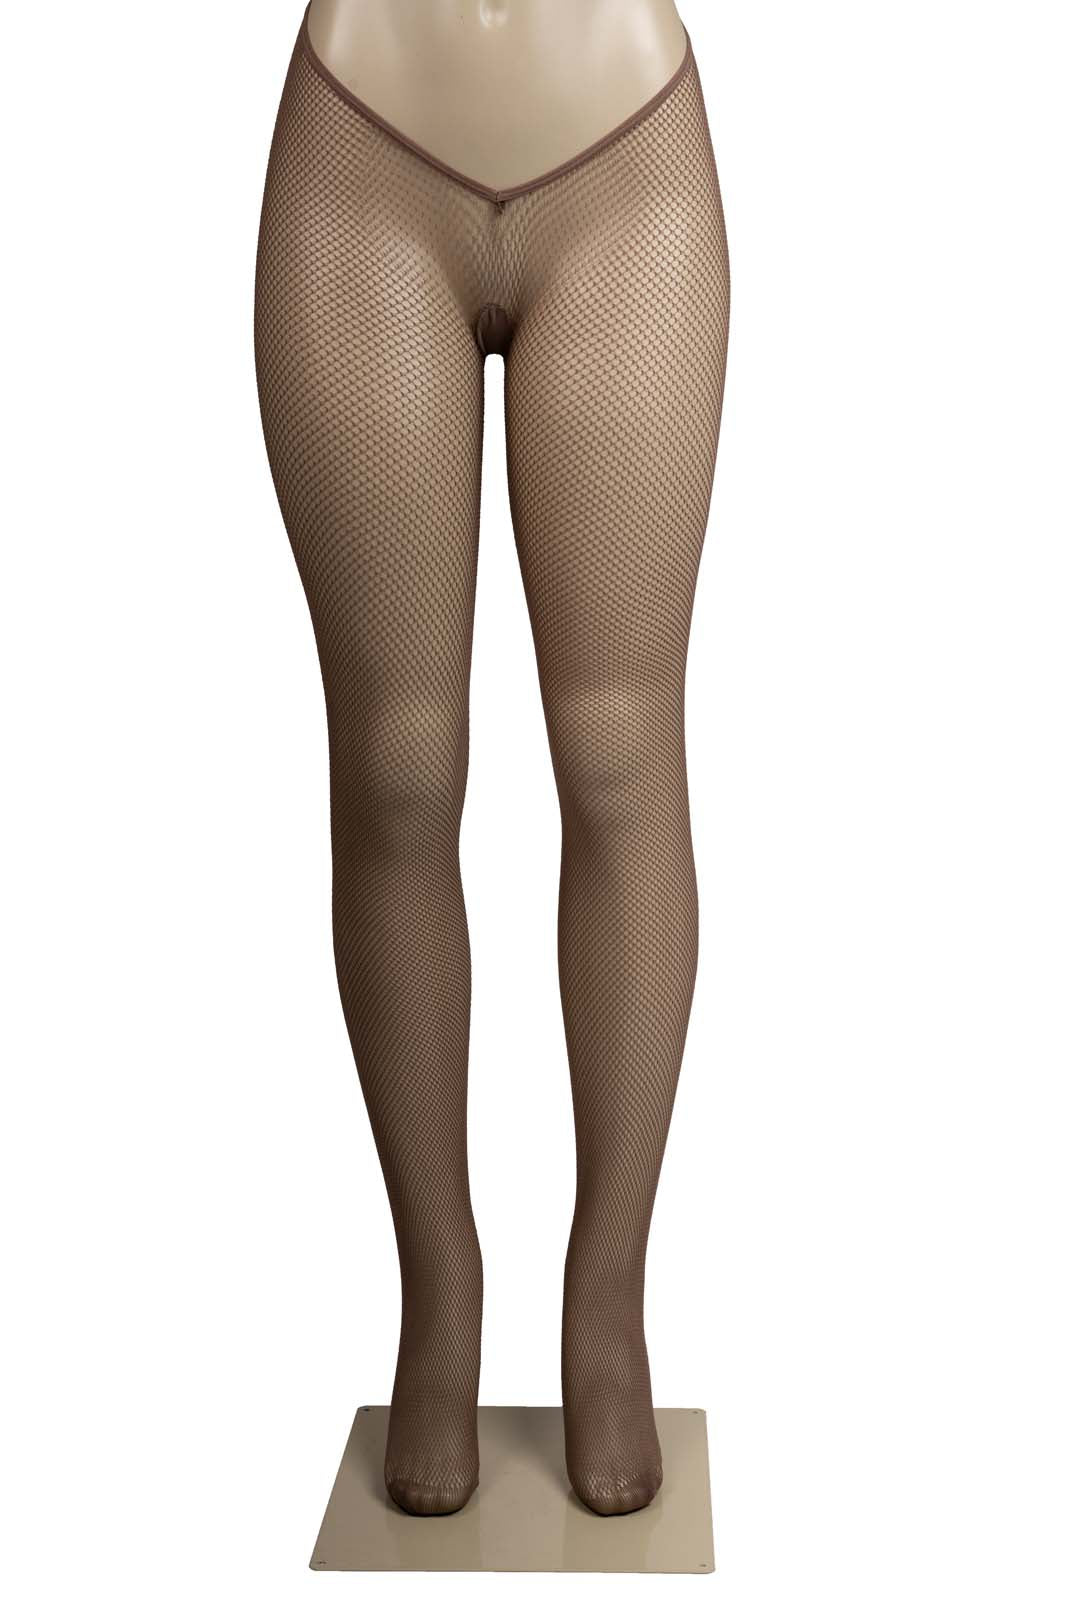 MATTE Cool Sensation Sheer to waist Carnival tights | plus size skin tone  stockings | brown salmon caramelo moisture control tights